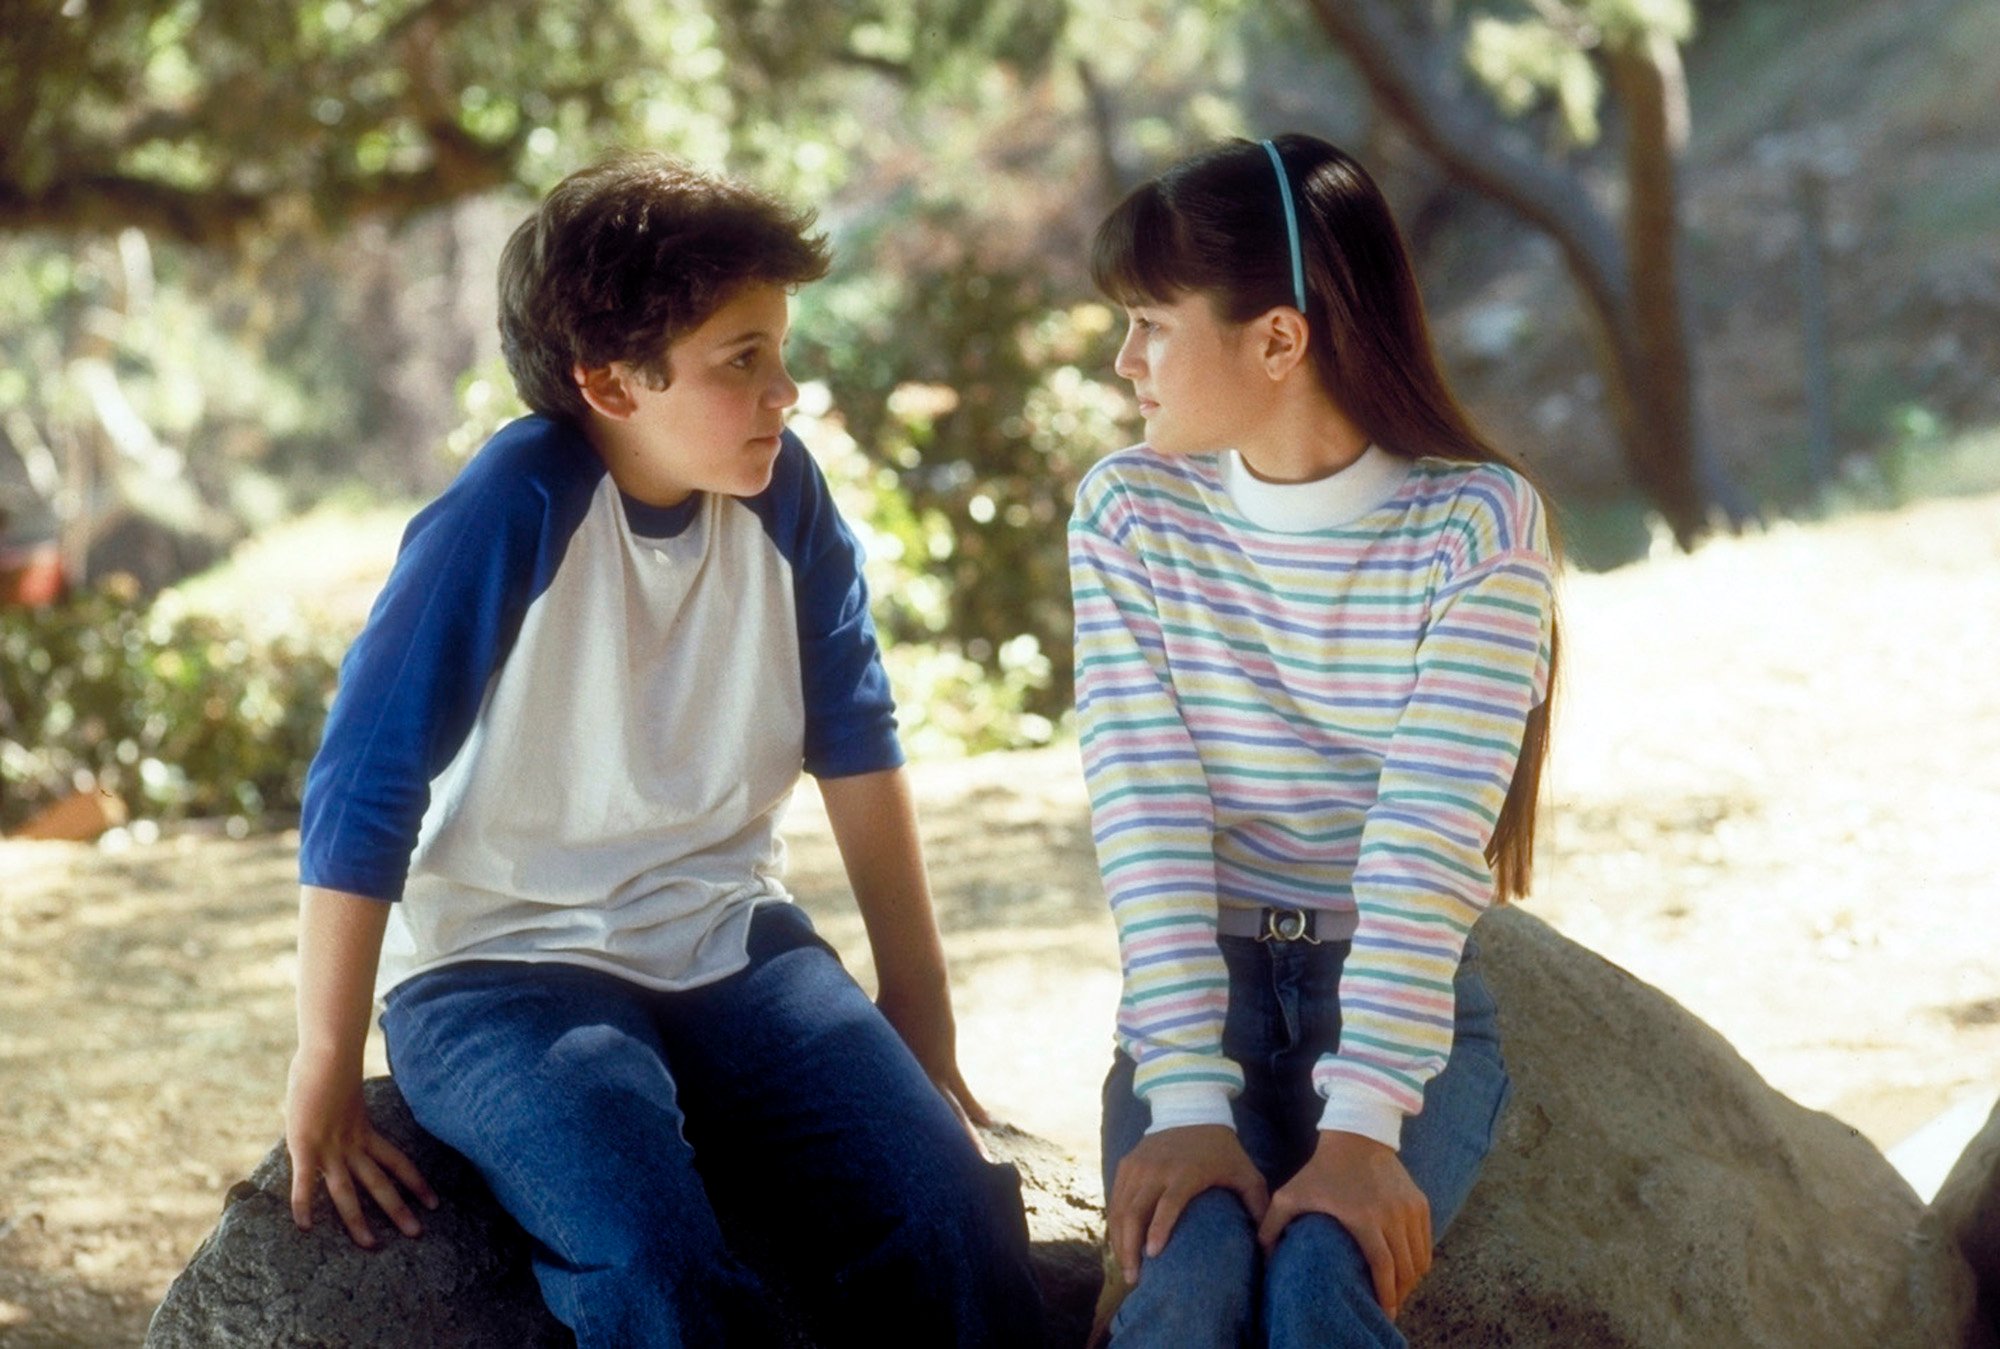 Fred Savage and Danica McKellar facing each other, sitting on rocks